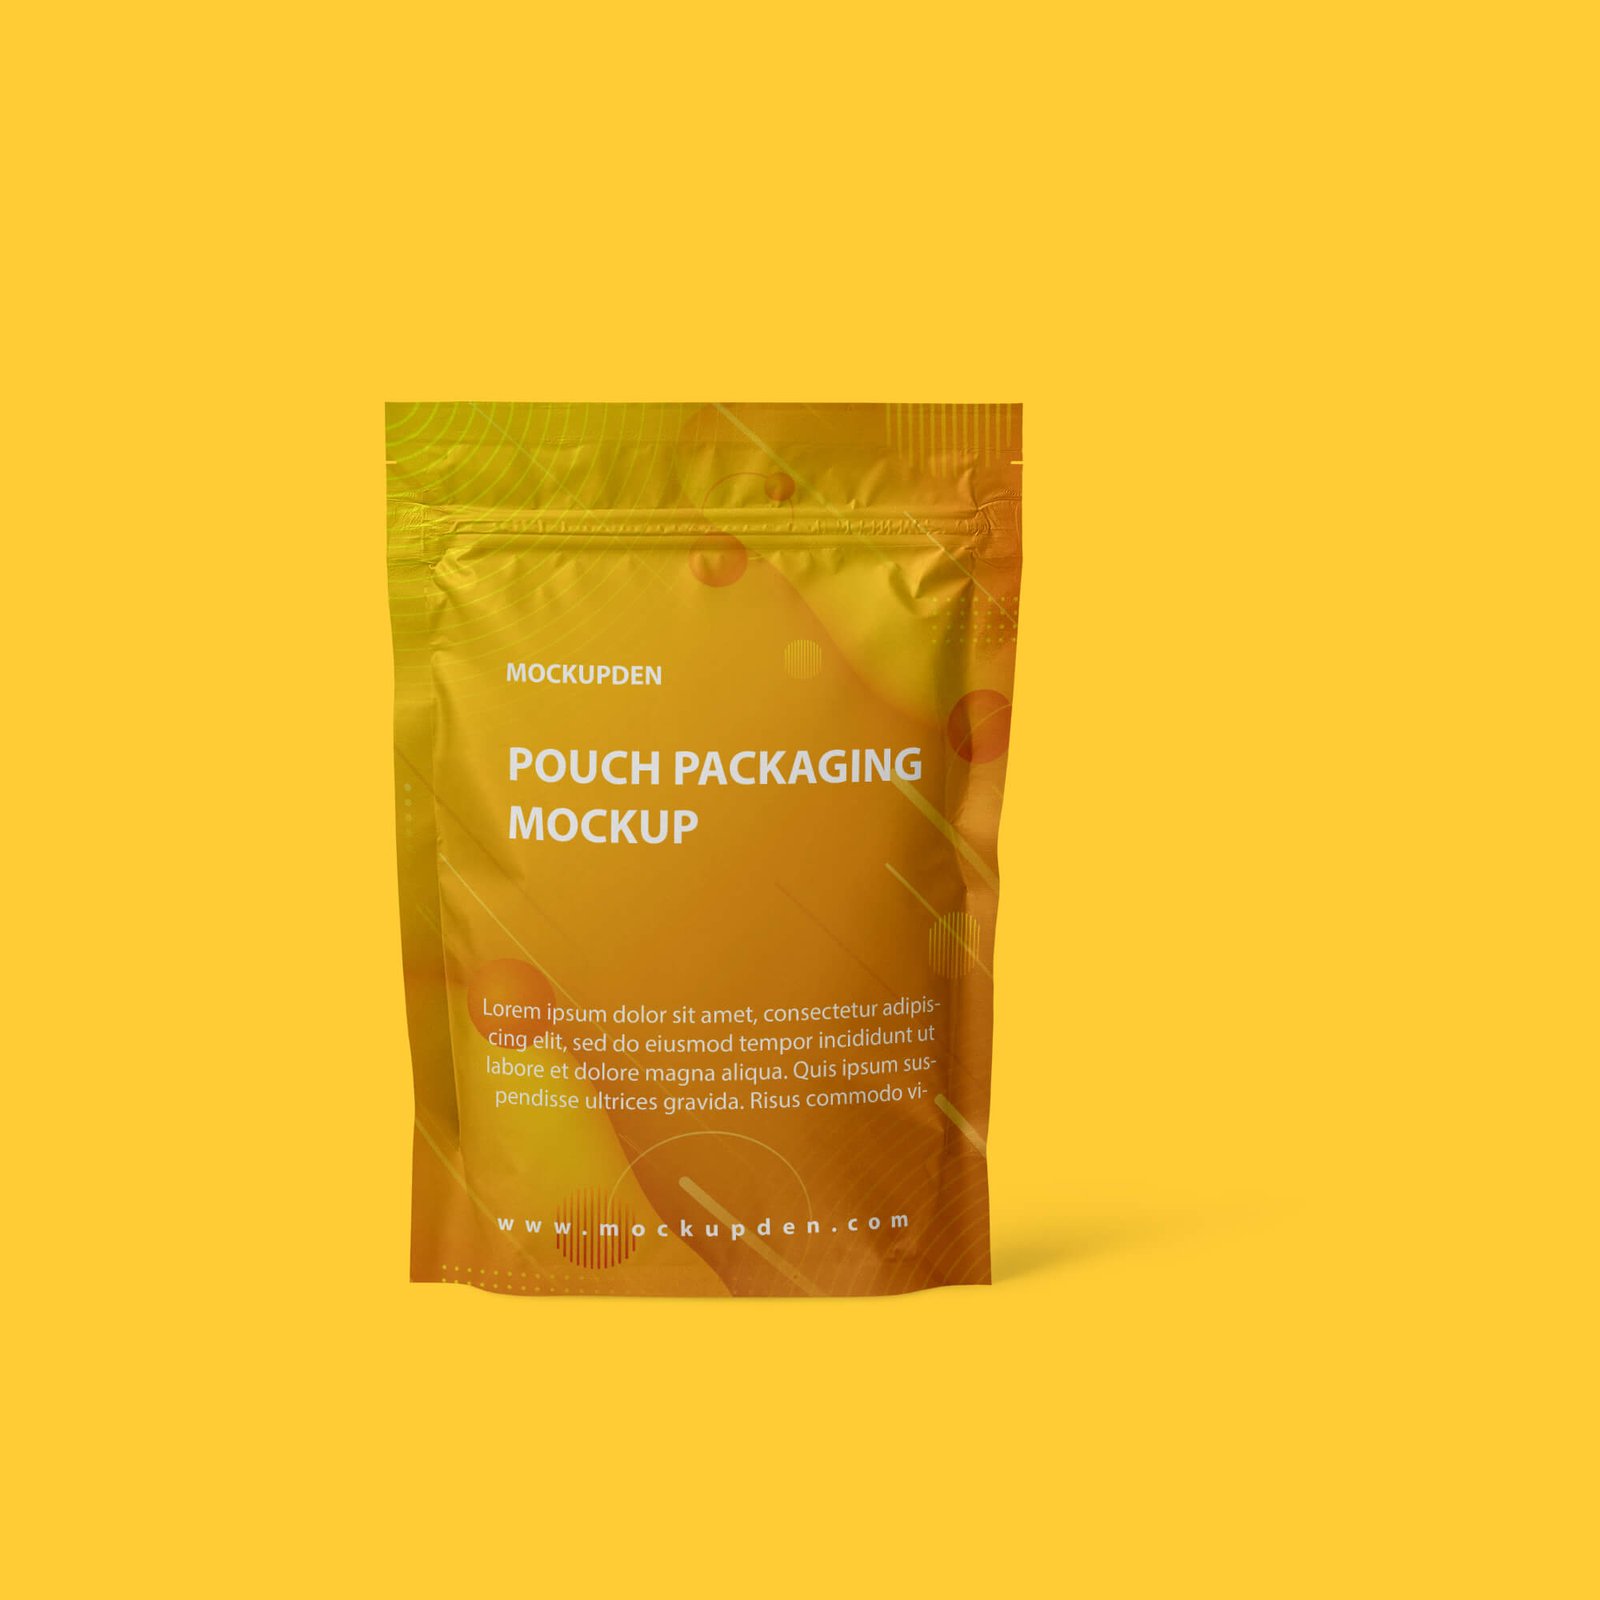 Design Free Pouch Packaging Mockup PSD Template